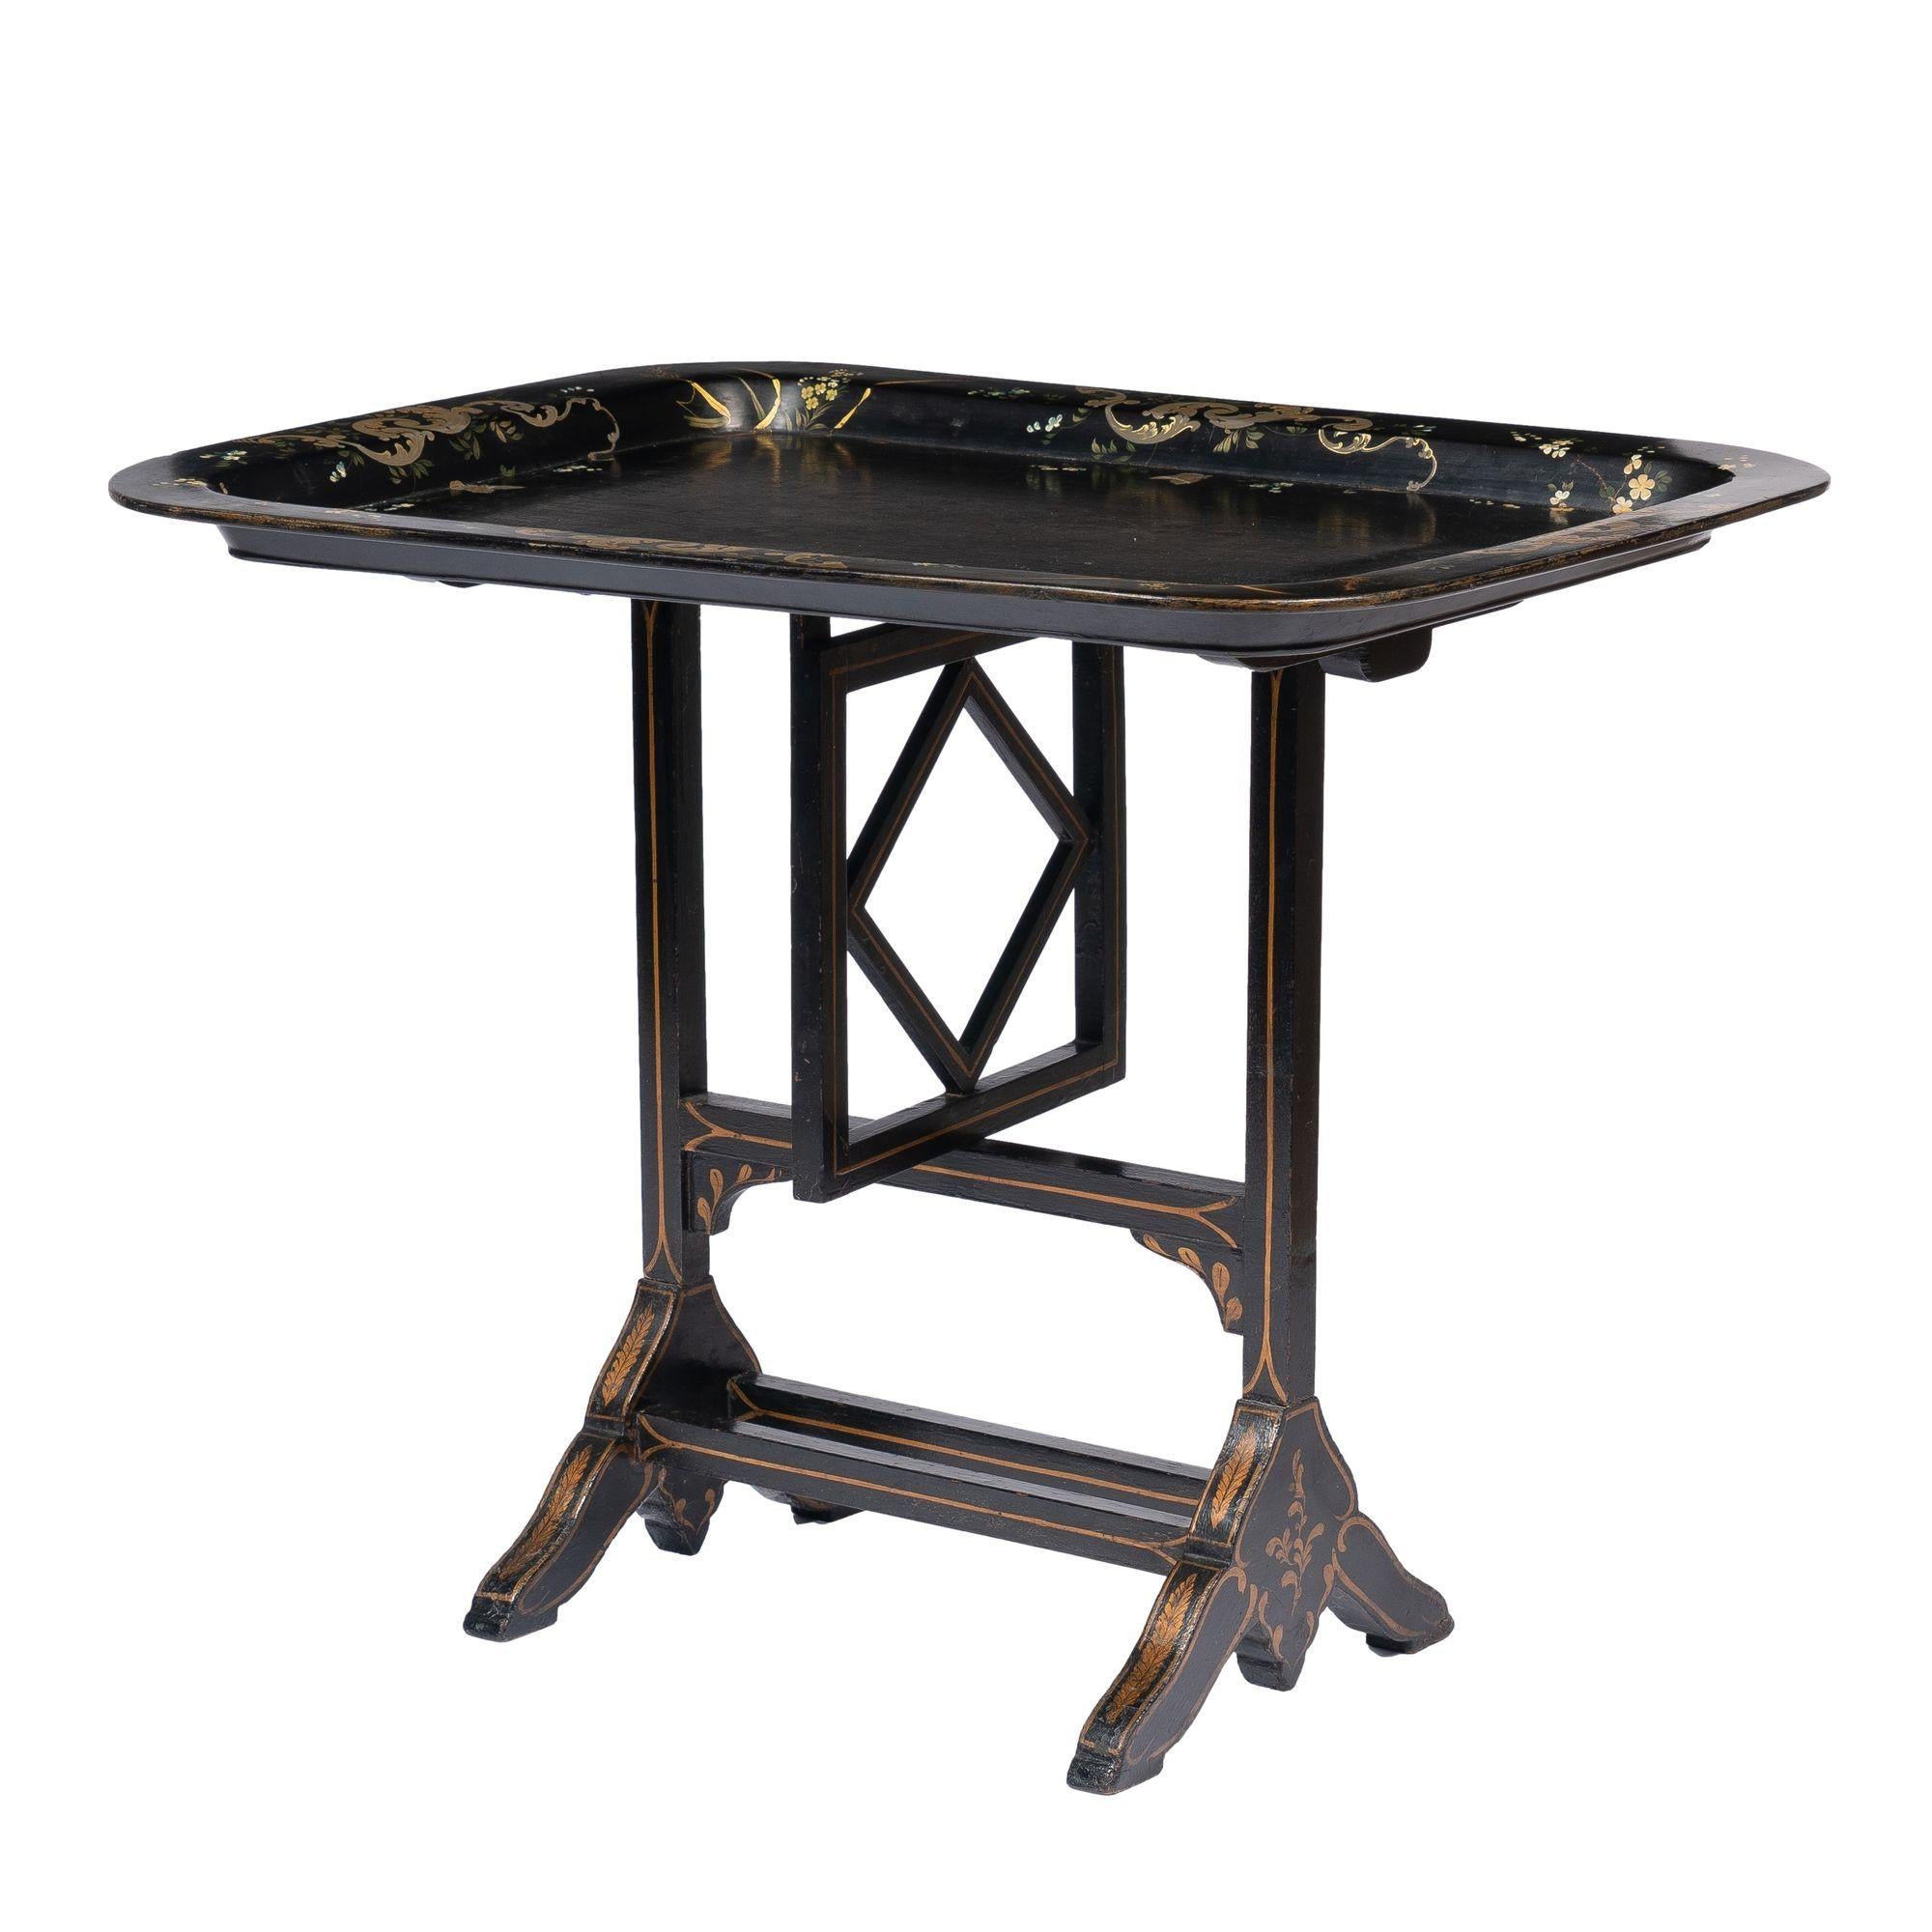 Rectangular paper mache tea tray table with a flat rim and rounded corners. The tray has a hand painted scroll work & floral border decoration and is mounted to a Jennings & Bettridge swivel brace ebonized wood stand with gilt stencil